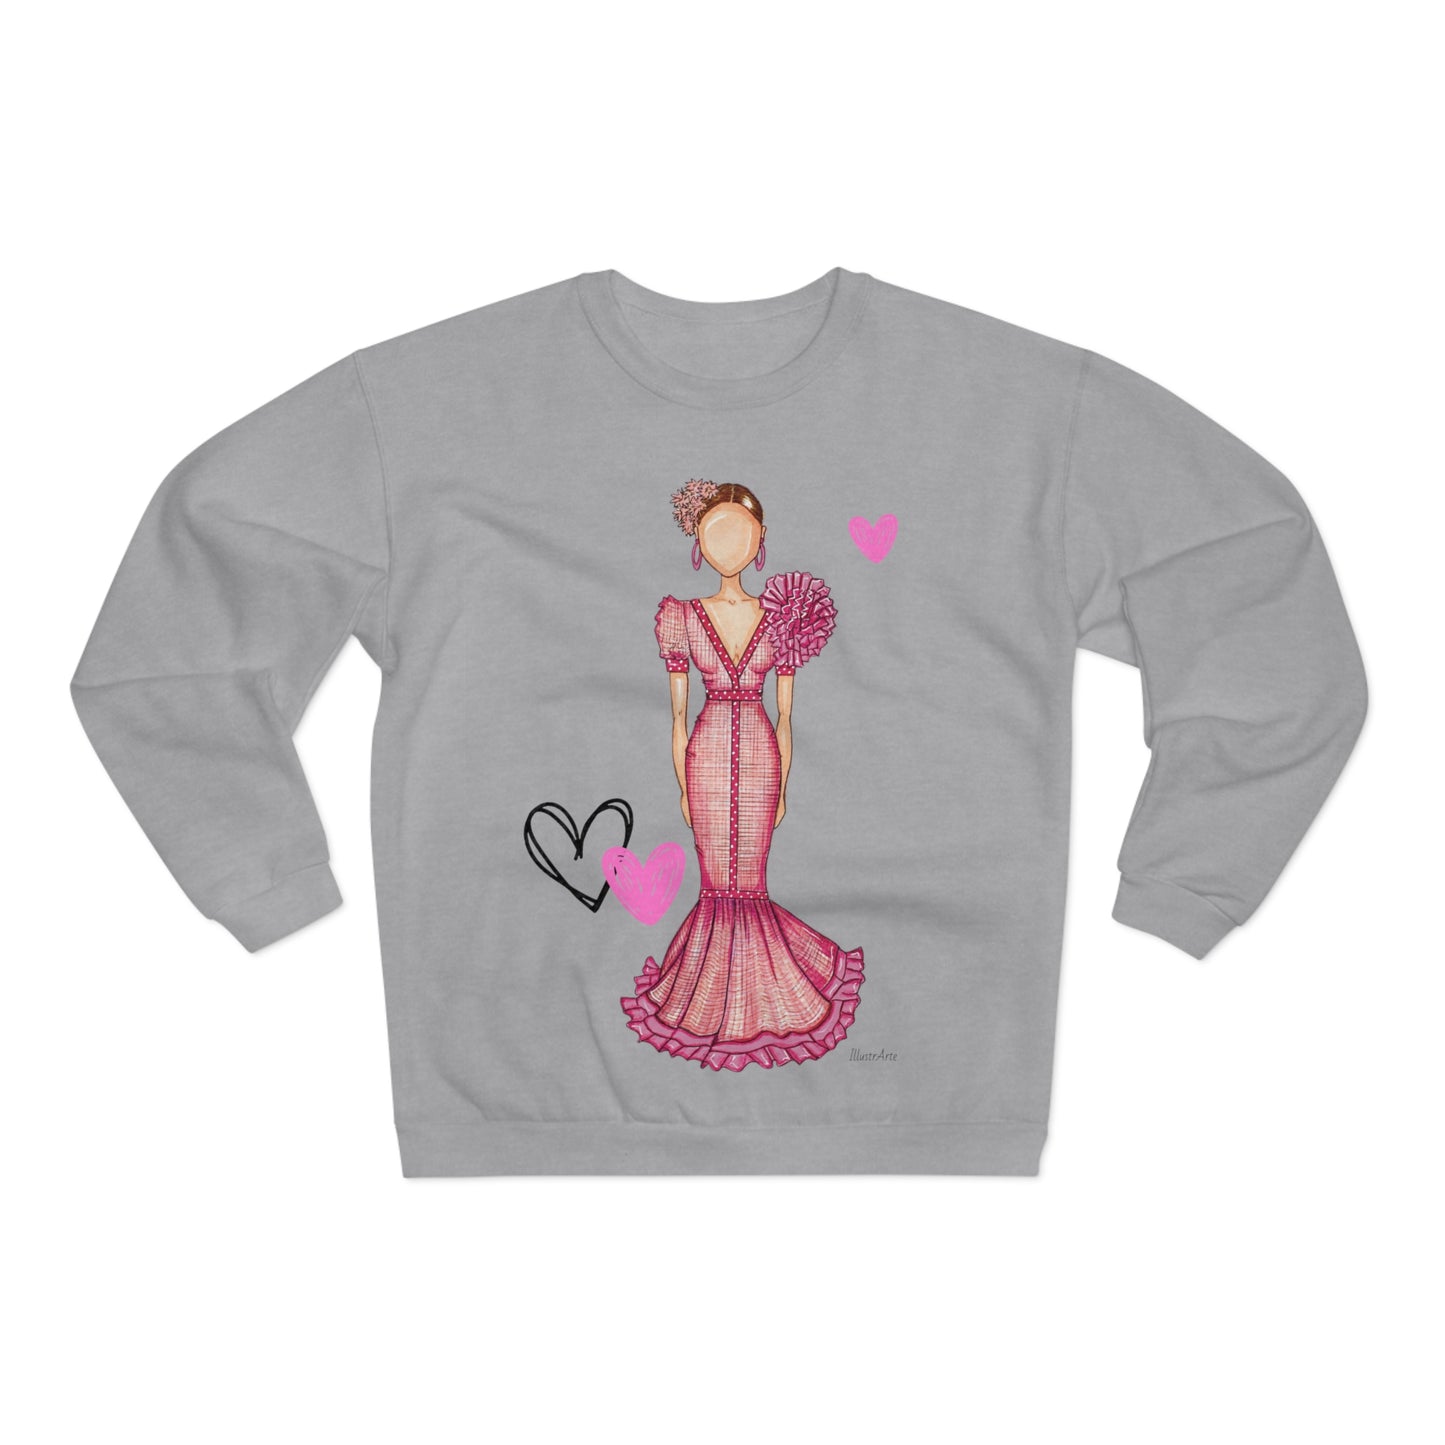 a women's sweatshirt with a drawing of a woman in a pink dress